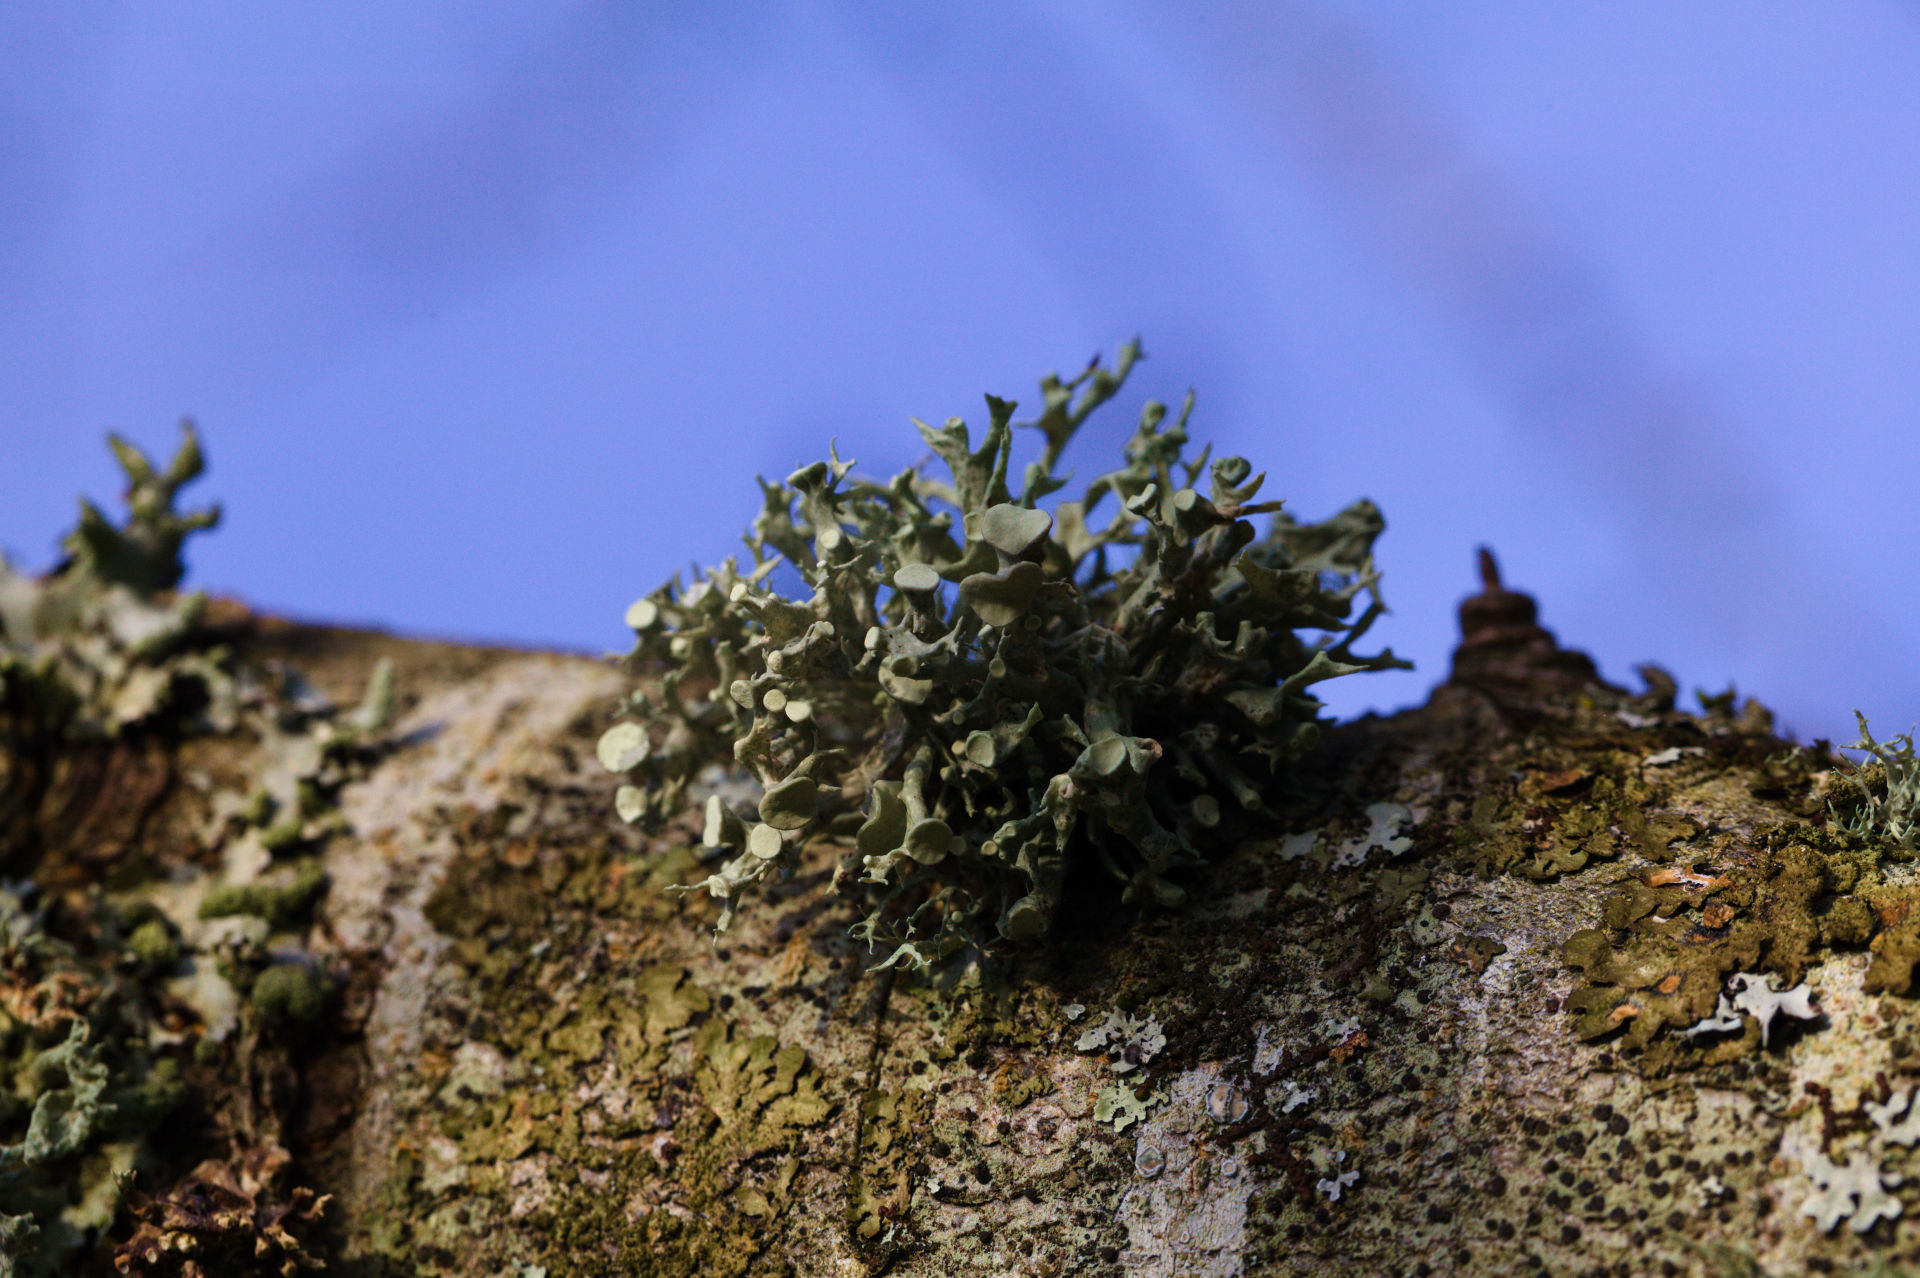 Photo of pixies cup type lichen as well as foliose type lichens in Llanblethian Orchard, Cowbridge.